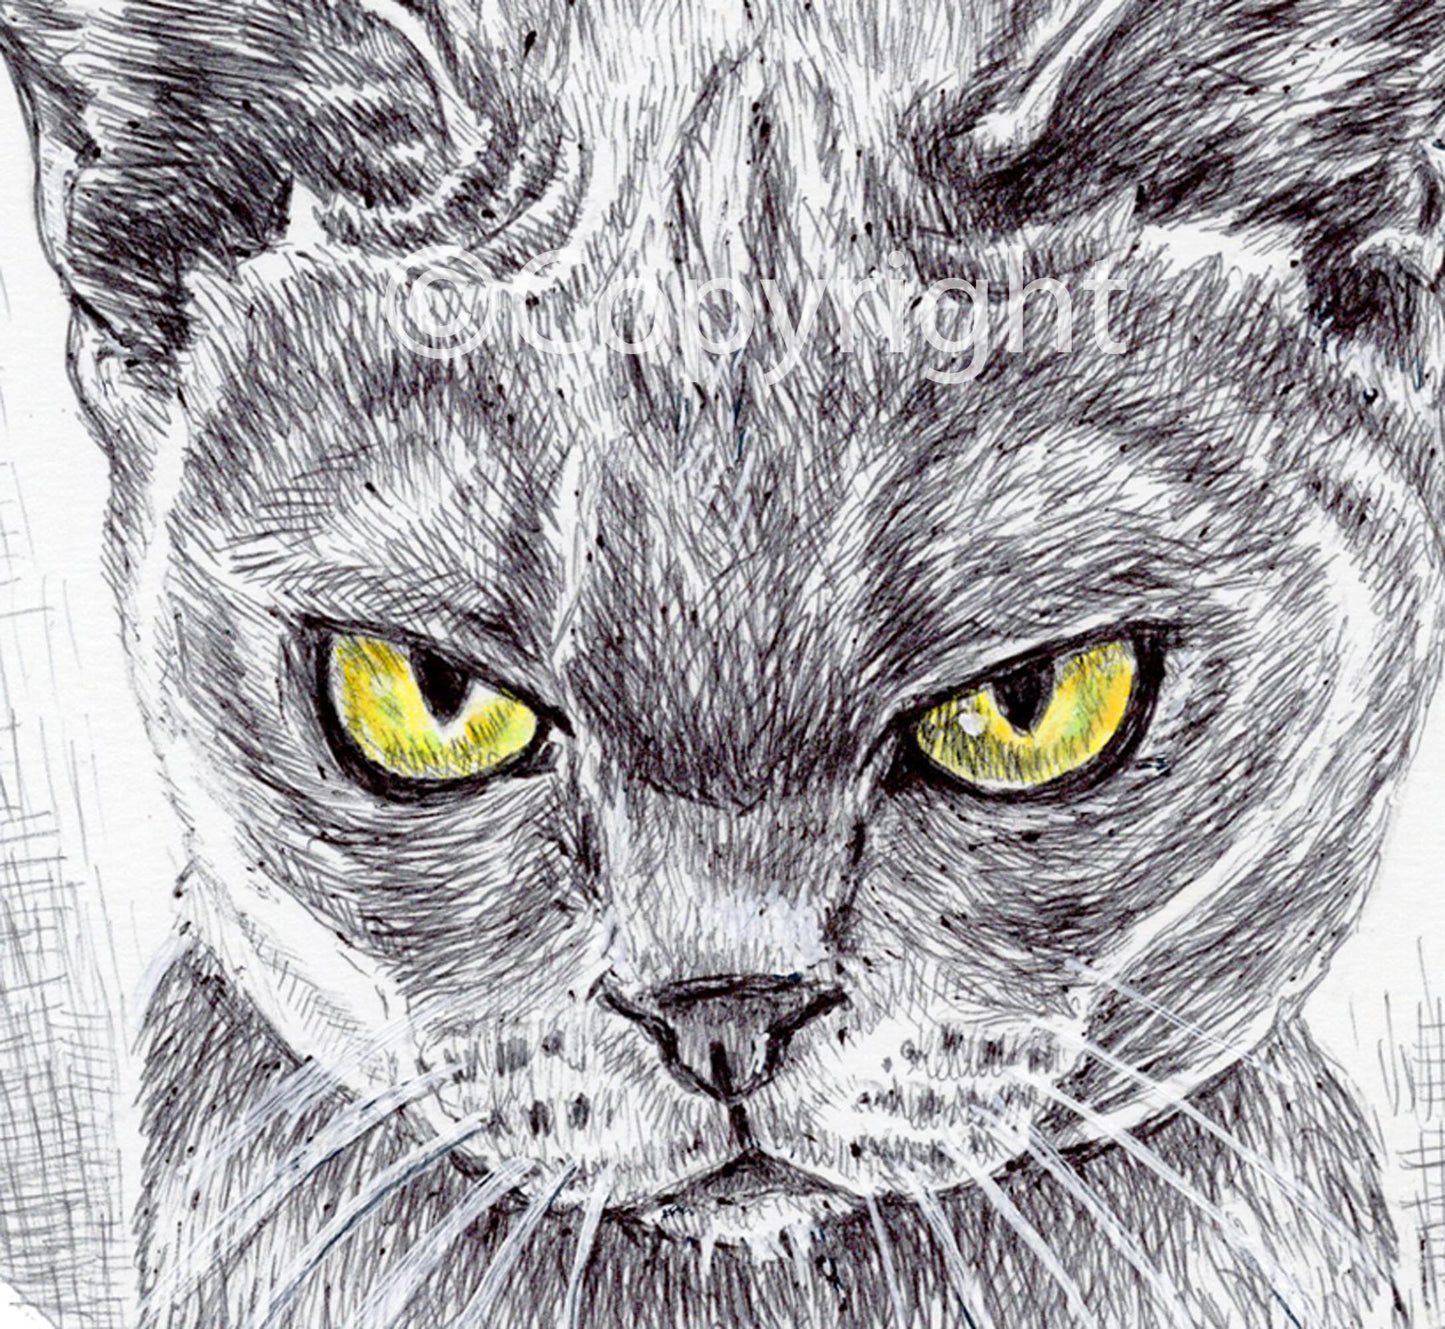 Ballpoint pen ink drawing of a very angry cat. Forgiveness is for dogs!